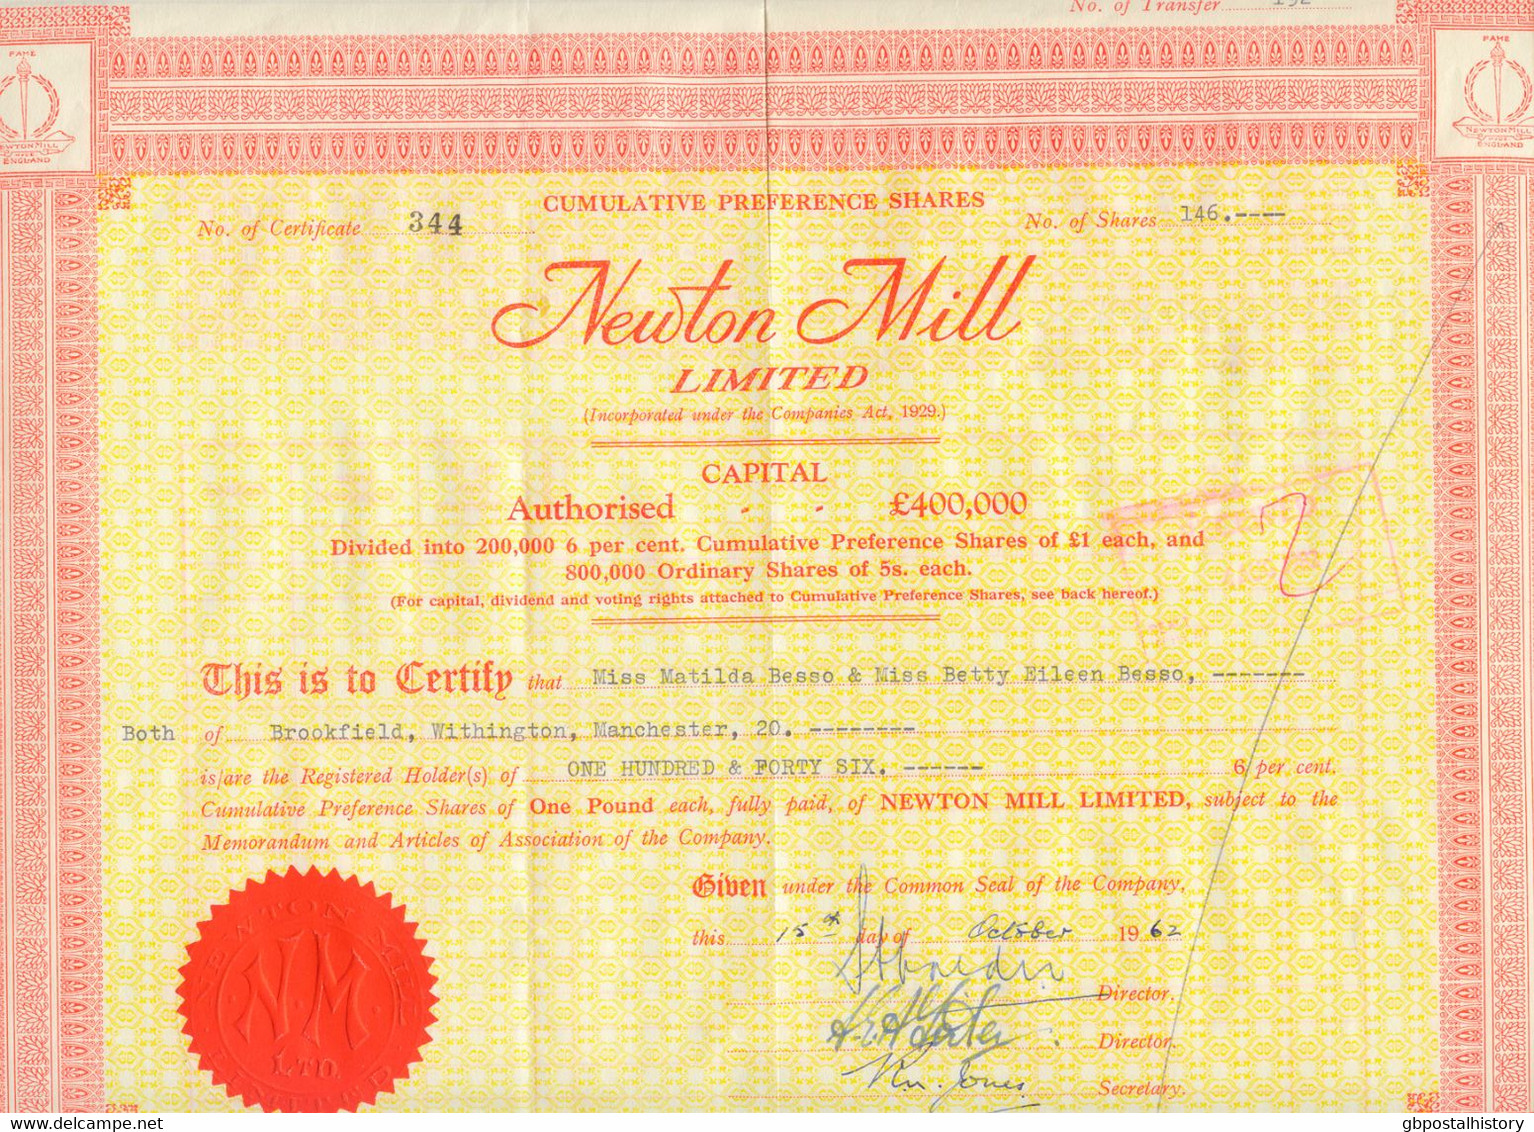 UNITED KINGDOM 1962, NEWTON MILL Ltd., London, Certificate Of 146 Preferred Shares, Each 1 Pound Sterling, very Fine - Agriculture